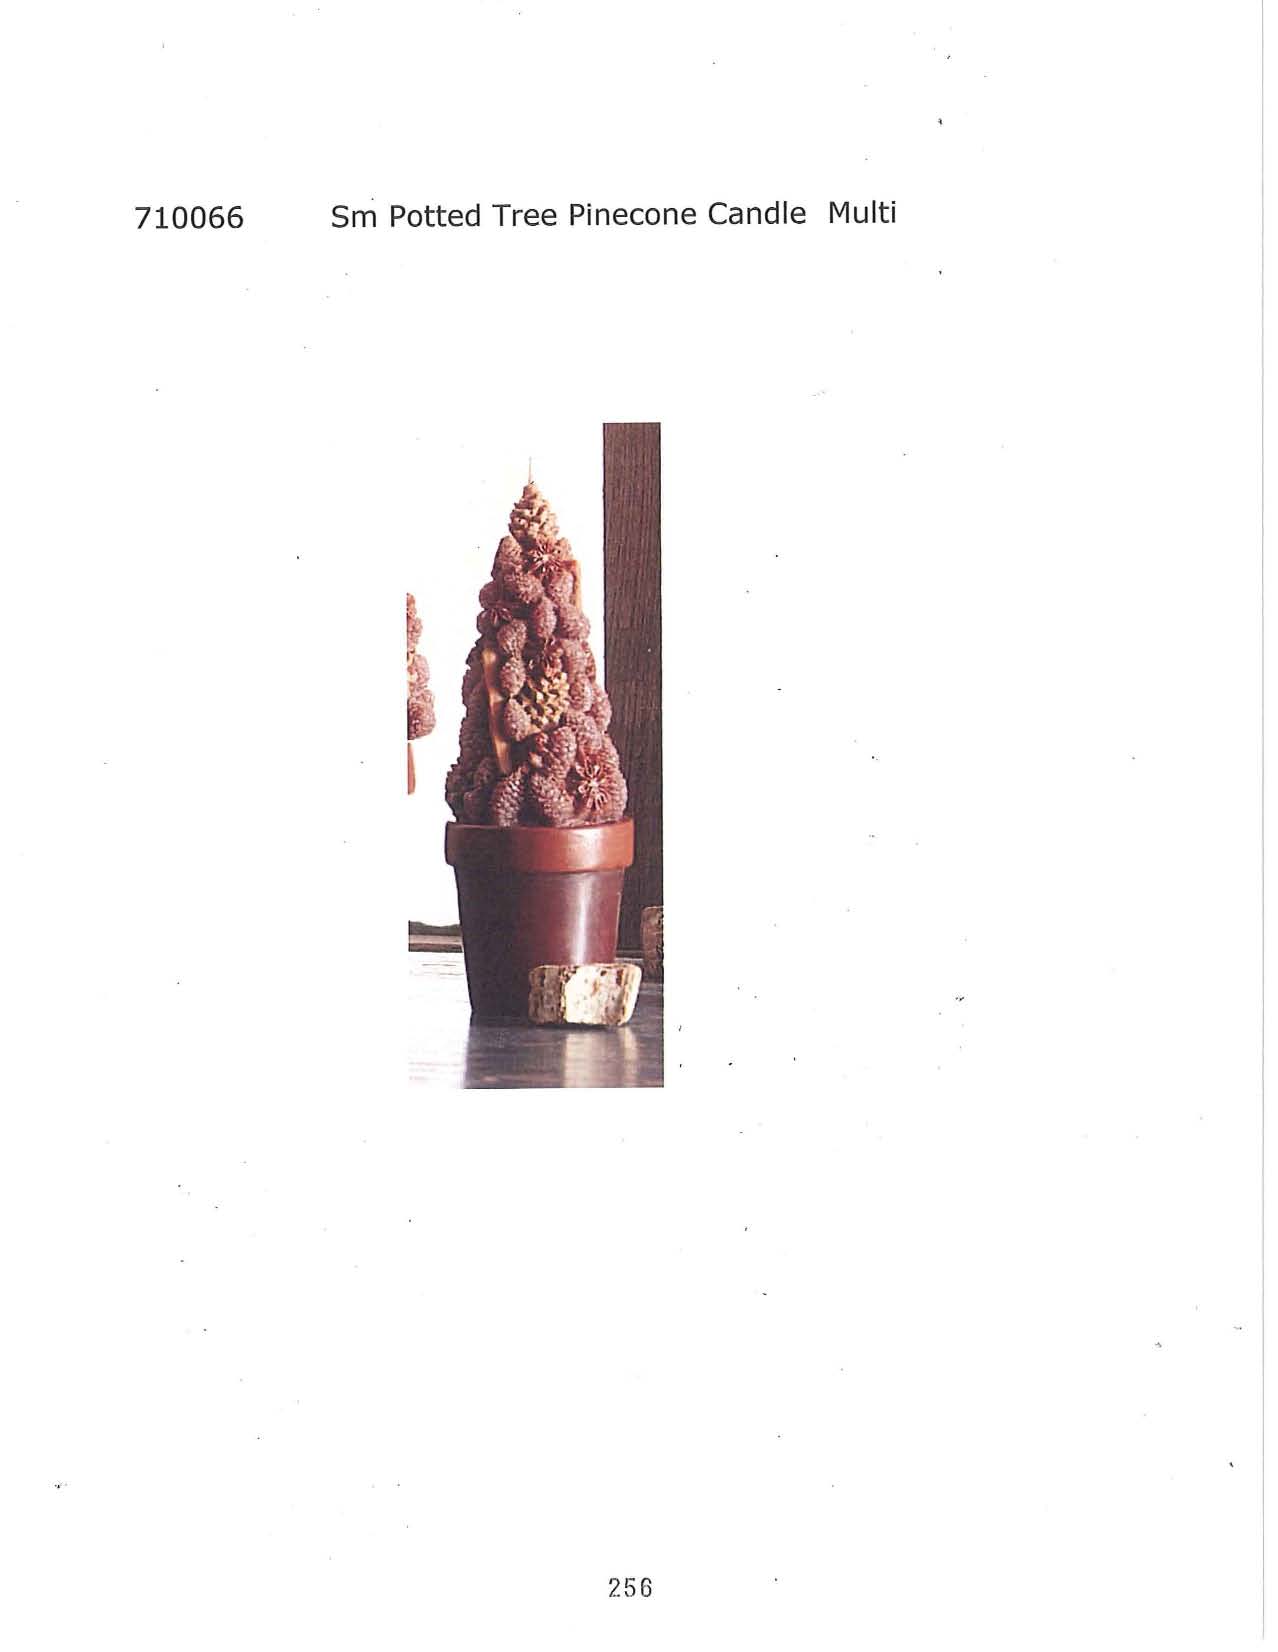 Small Potted Tree Pinecone Candle - Multi